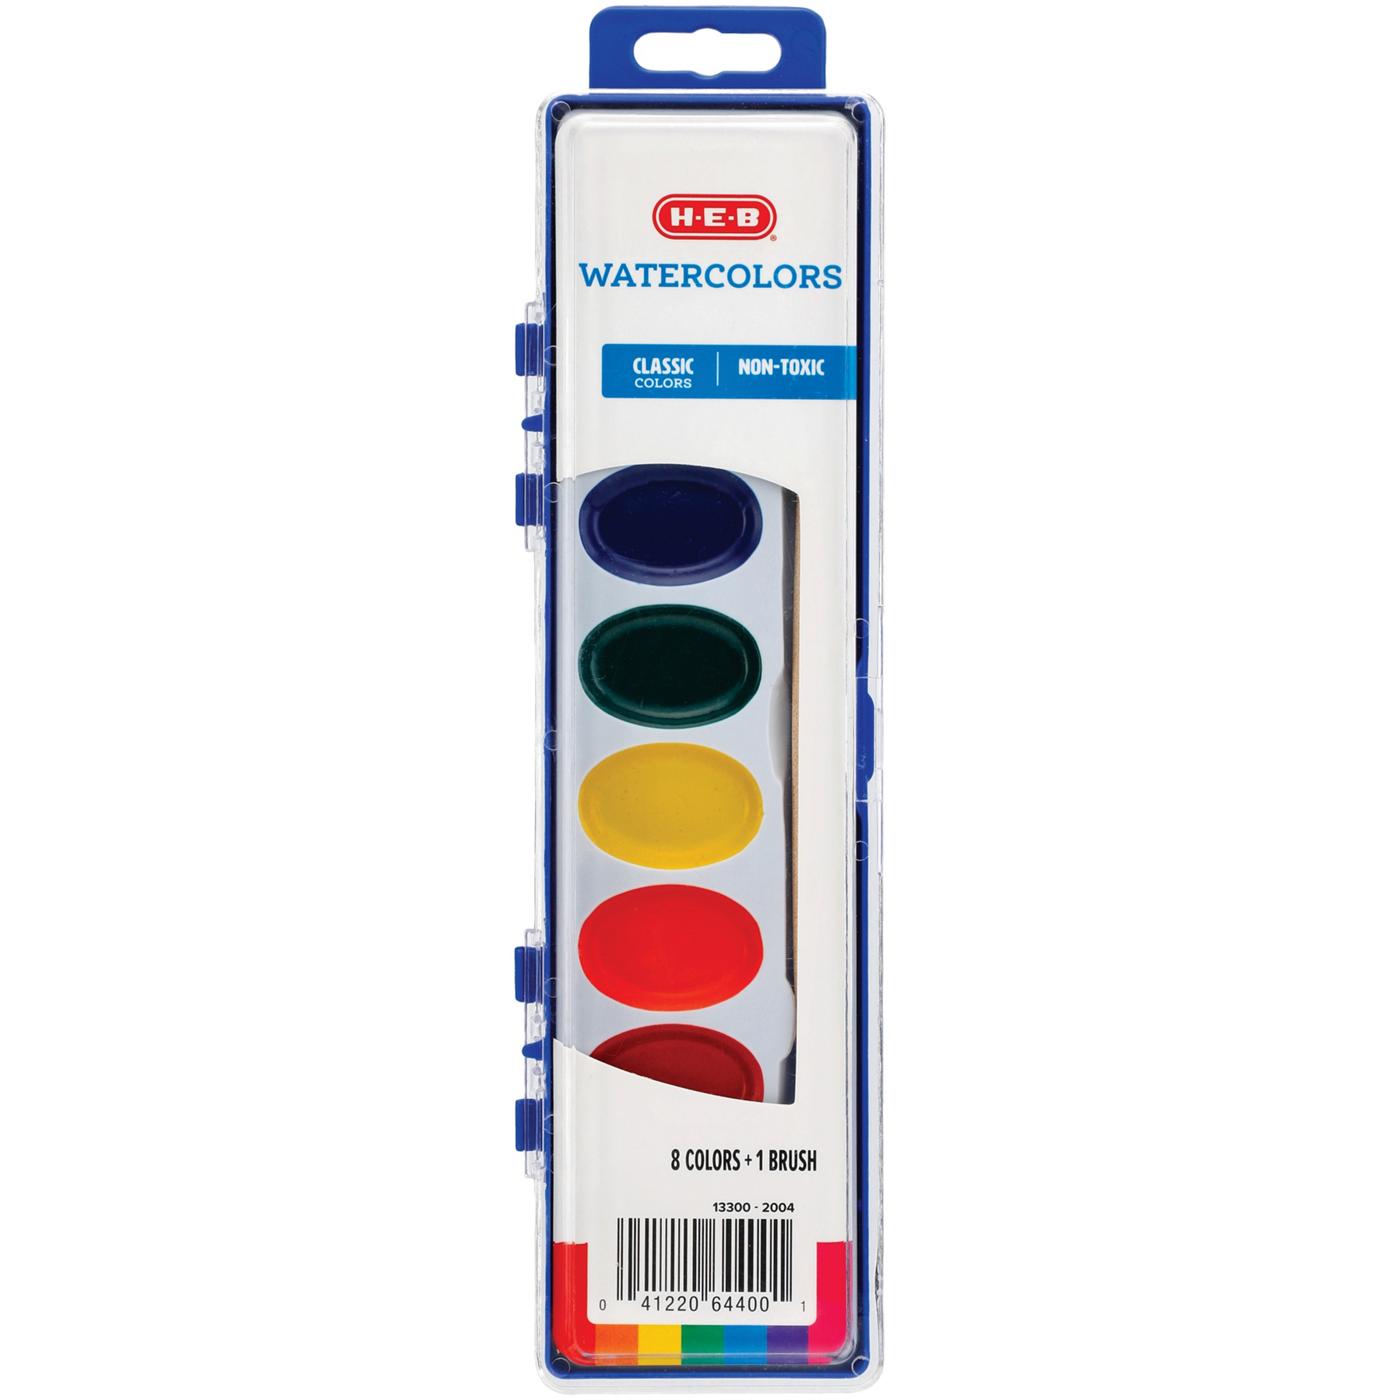 H-E-B Watercolors with Brush - 8 Color; image 1 of 2